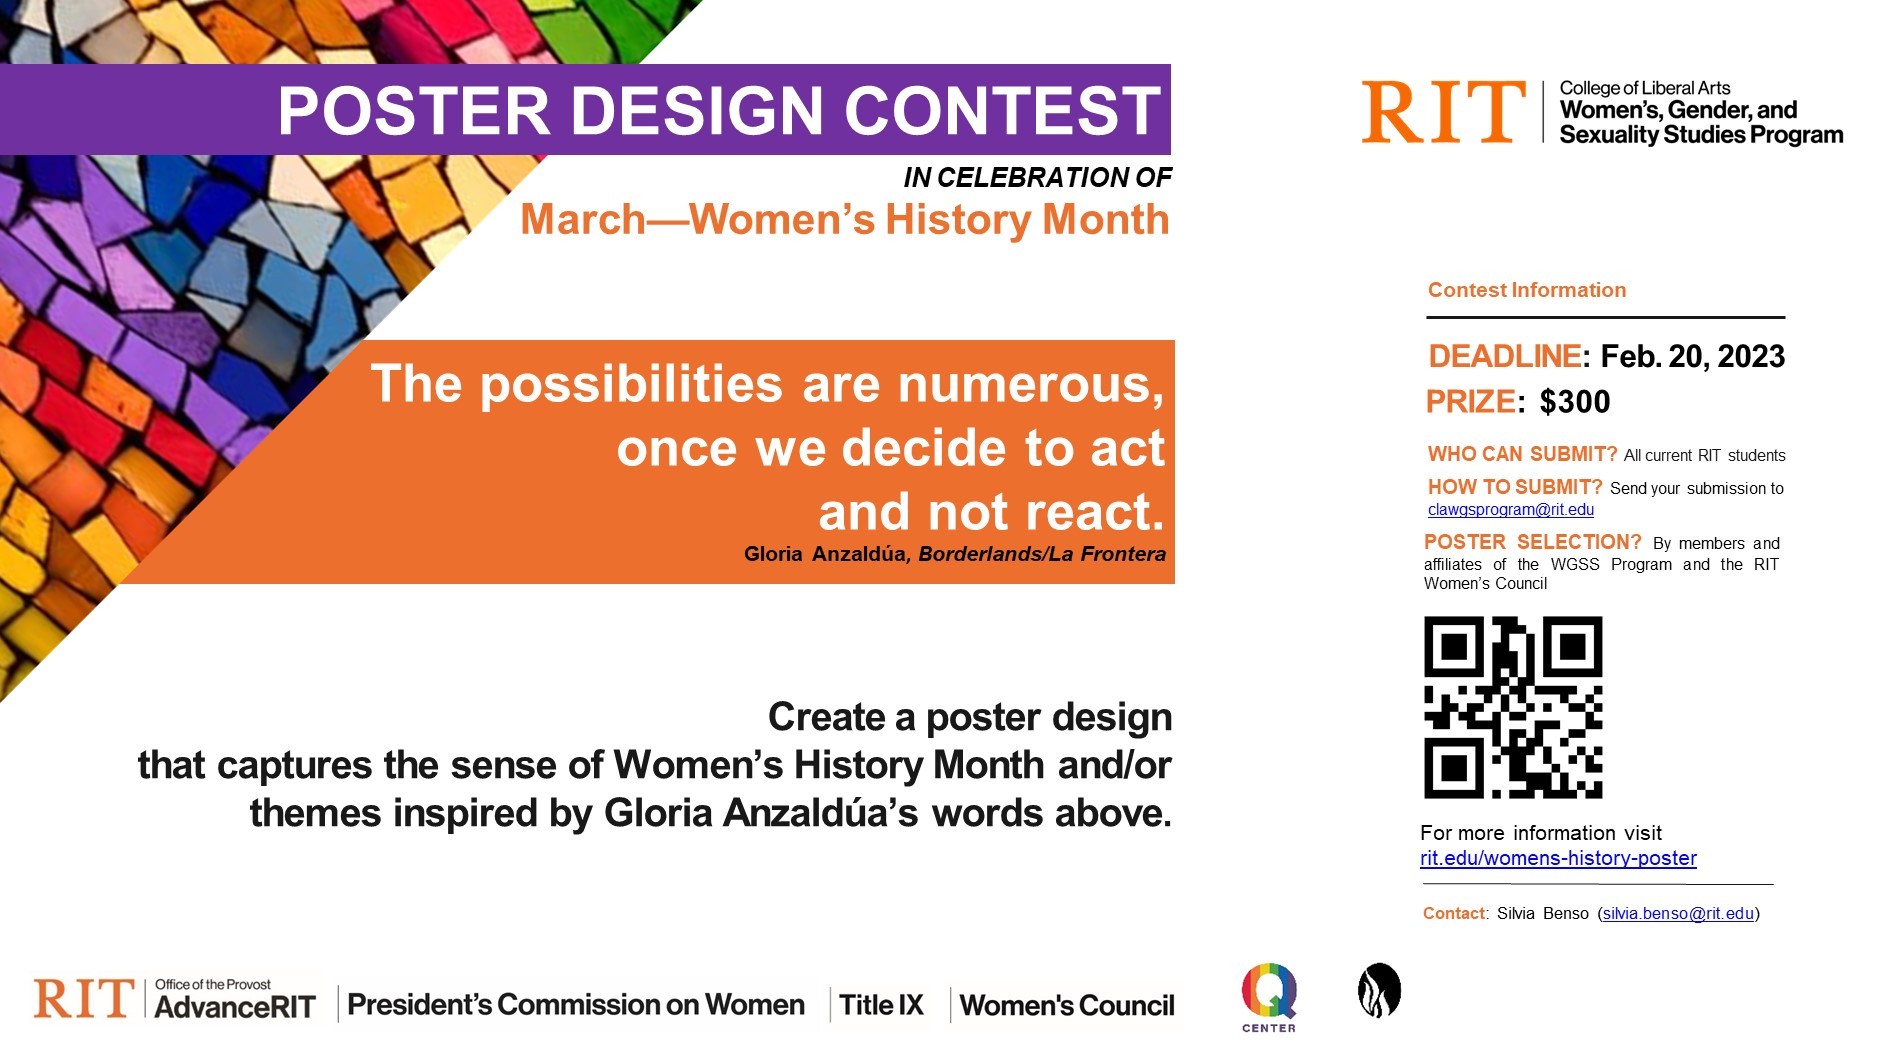 Women's history Month Poster Contest--$300 prize; submission deadline Feb. 20, 2023